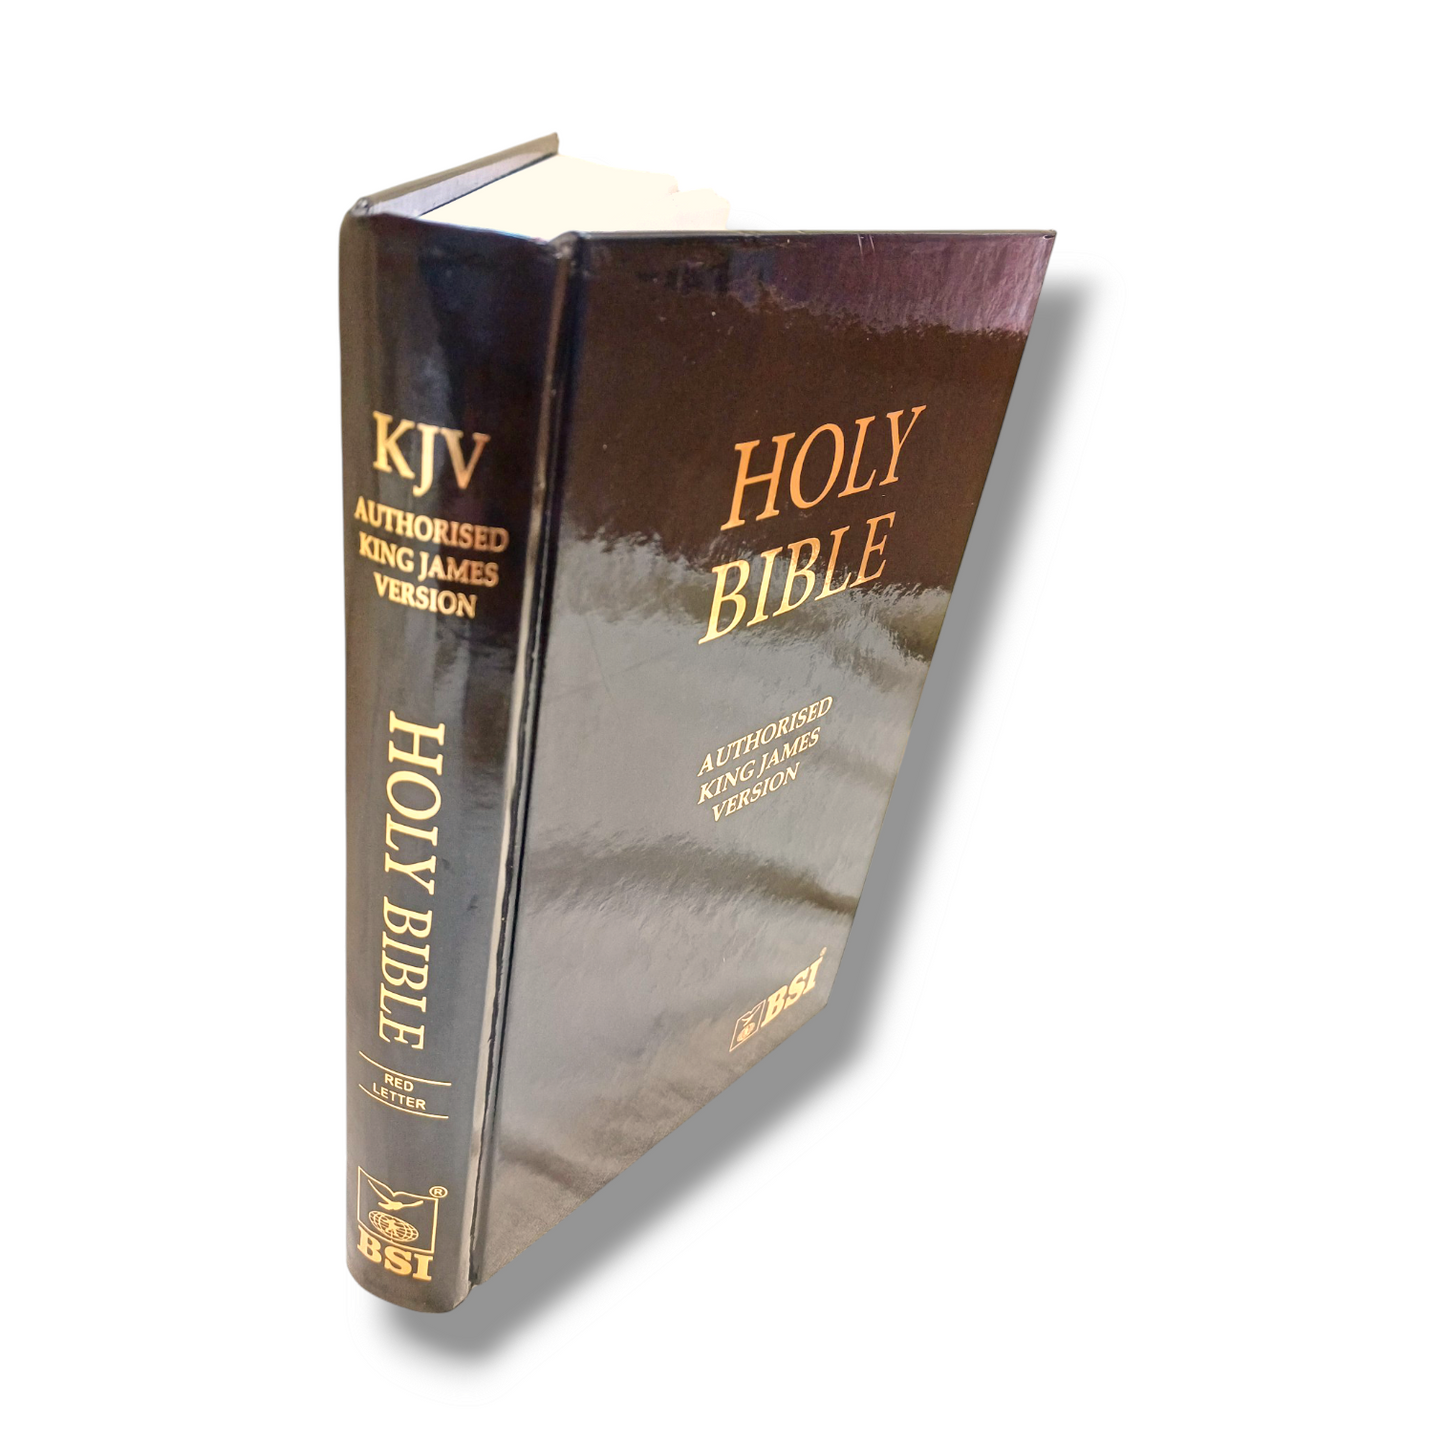 The Holy Bible In King James Version |Red Letter Edition |Normal Size KJV Bible